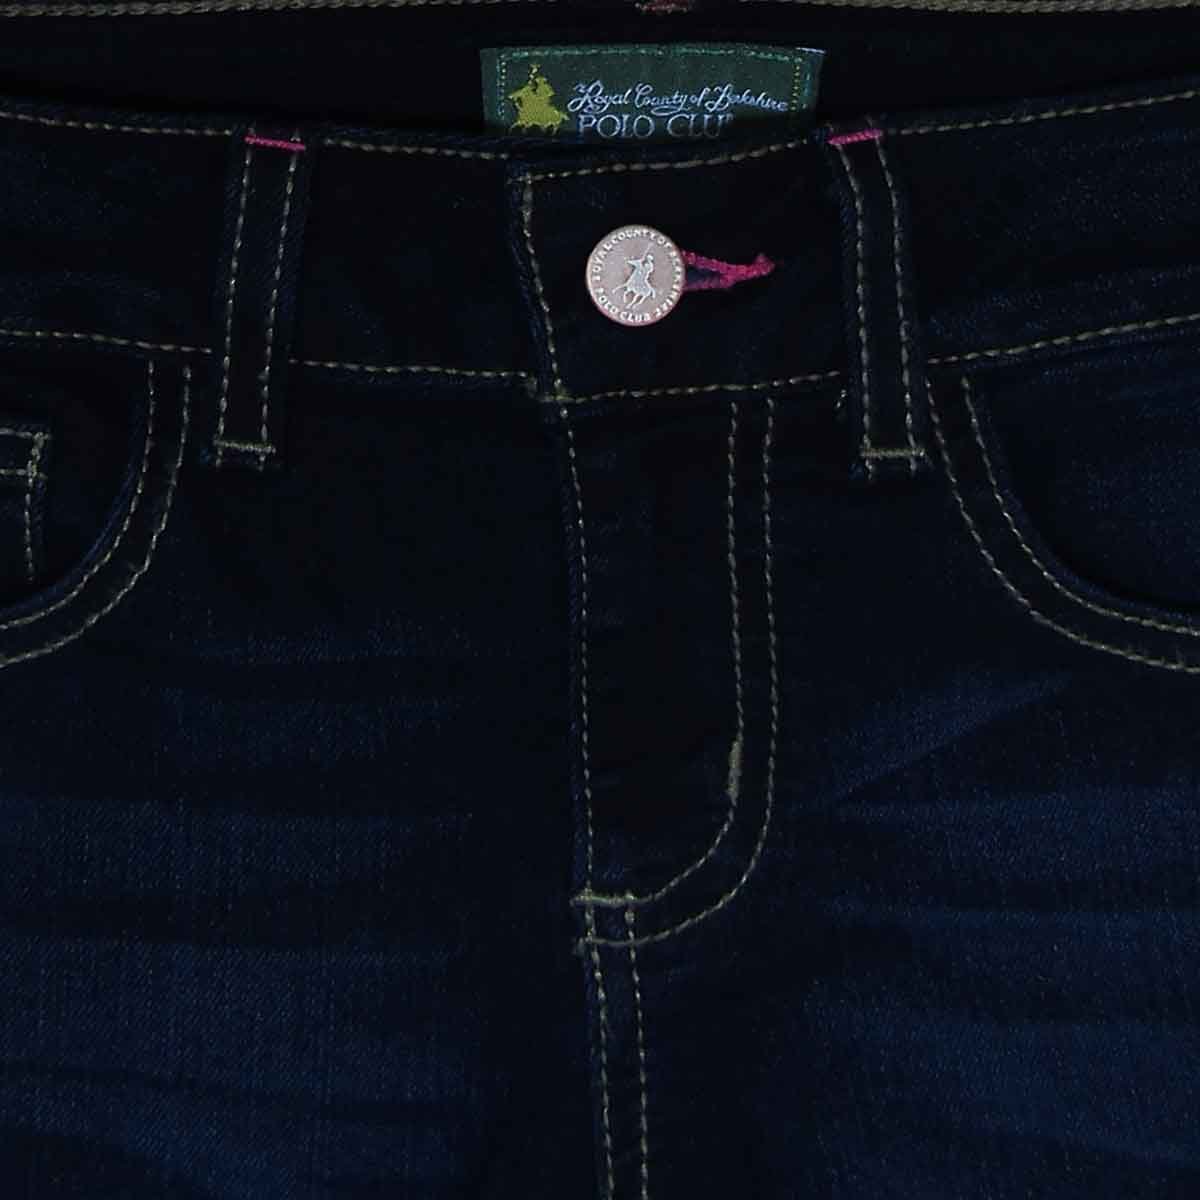 Jeans Skinny Obscuro Royal Polo Club